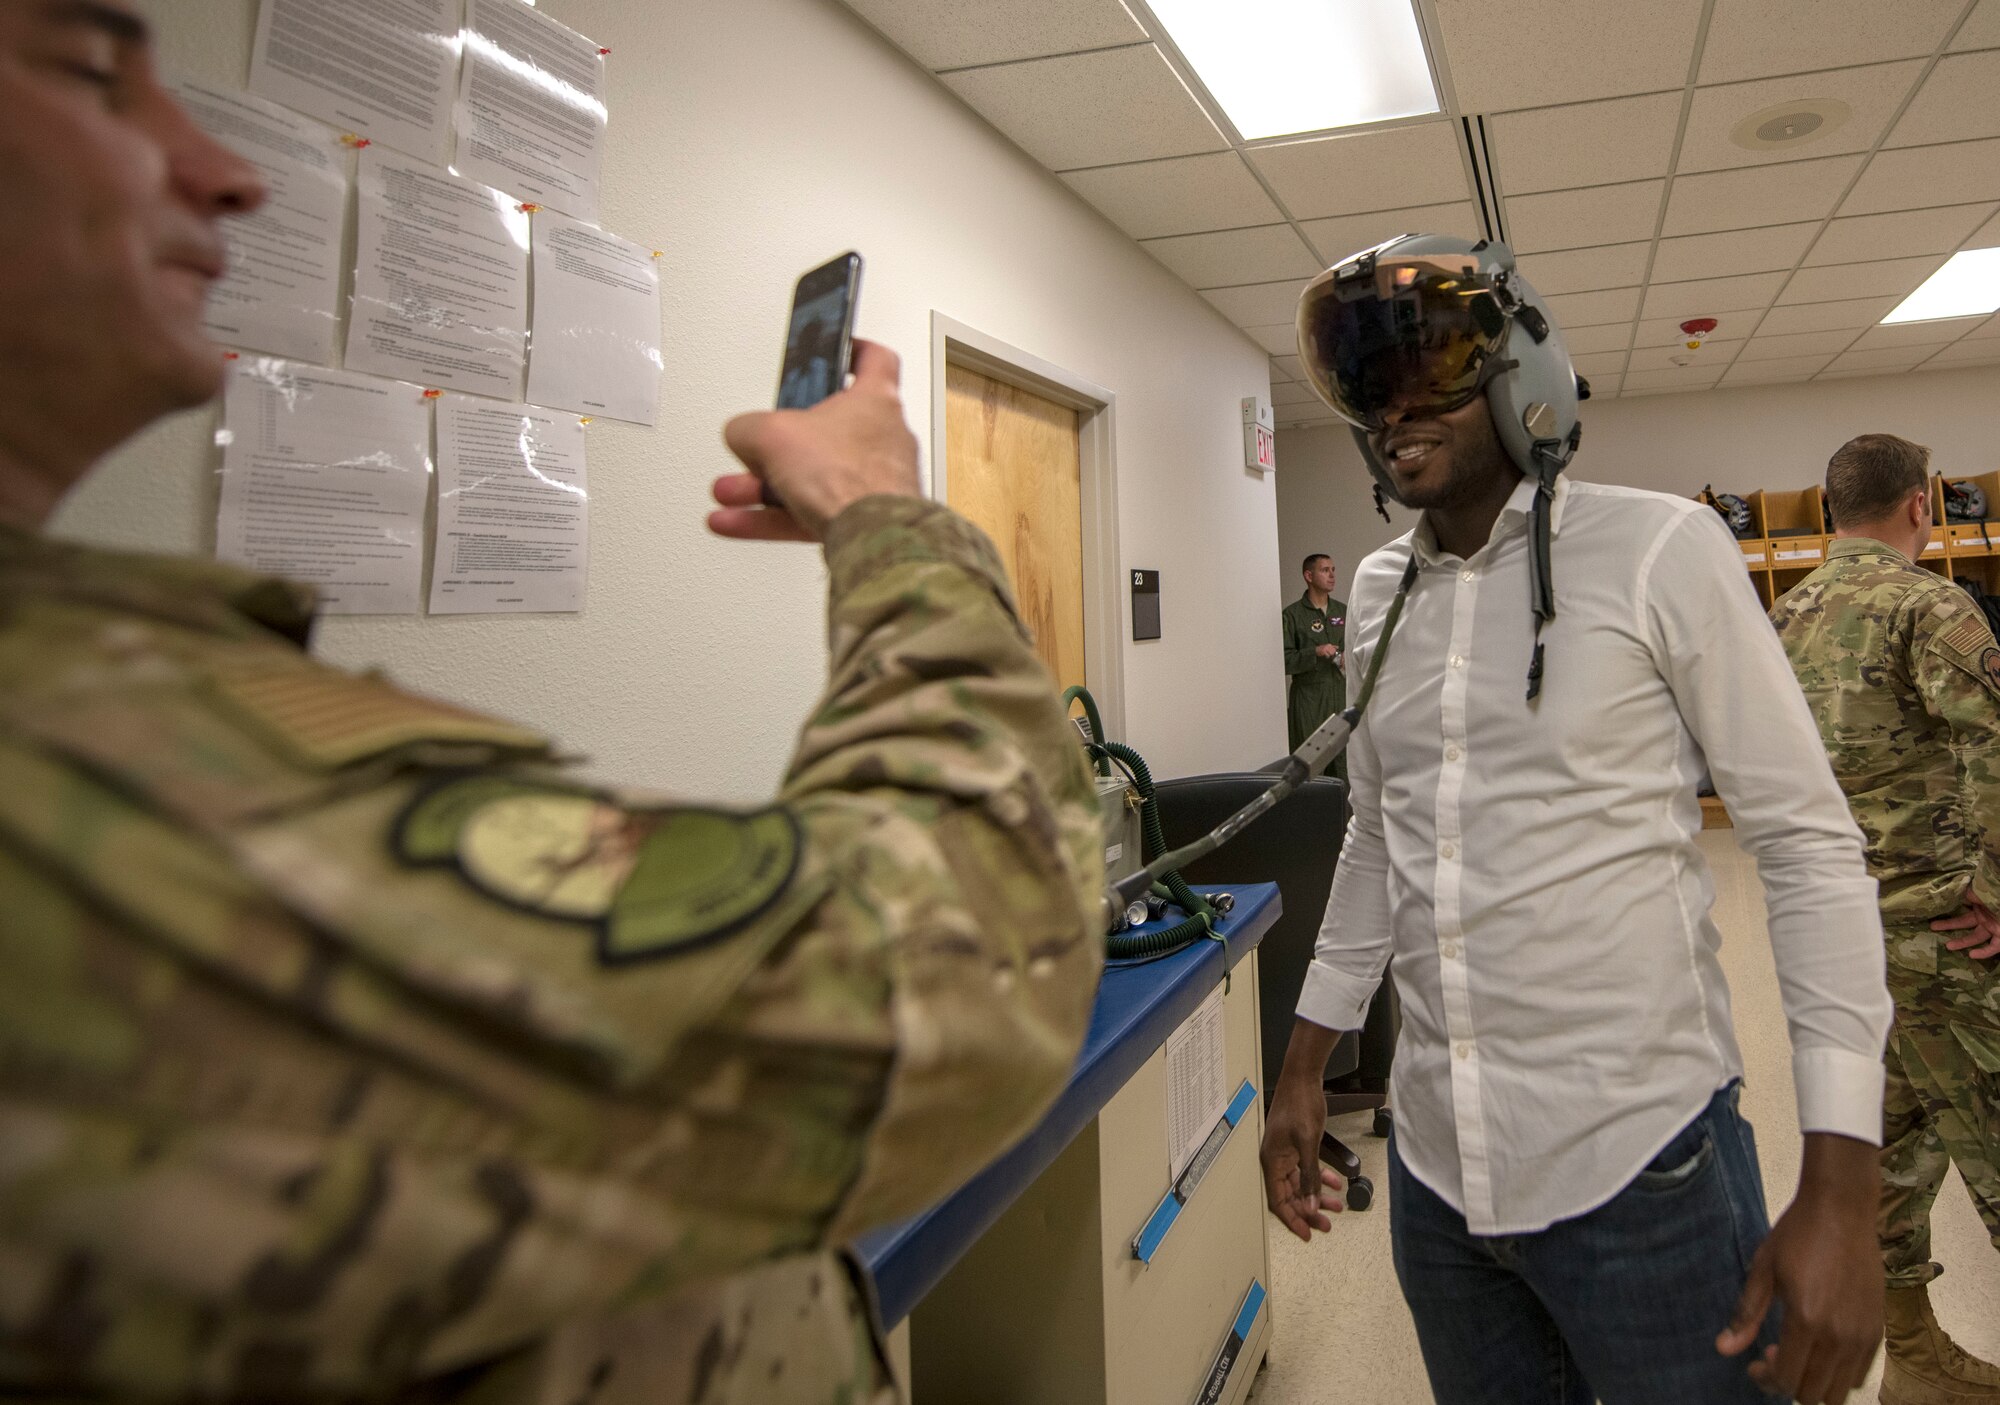 Col. Joseph Campo, 49th Wing commander, takes a photo of Yves Zamar, congressional staff representative for Congresswoman Deb Haaland, in a helmet, Oct 2, 2019, on Holloman Air Force Base, N.M. Staffers visited to better understand the Holloman mission and its role within New Mexico. (U.S. Air Force photo by Staff Sgt. Christine Groening)